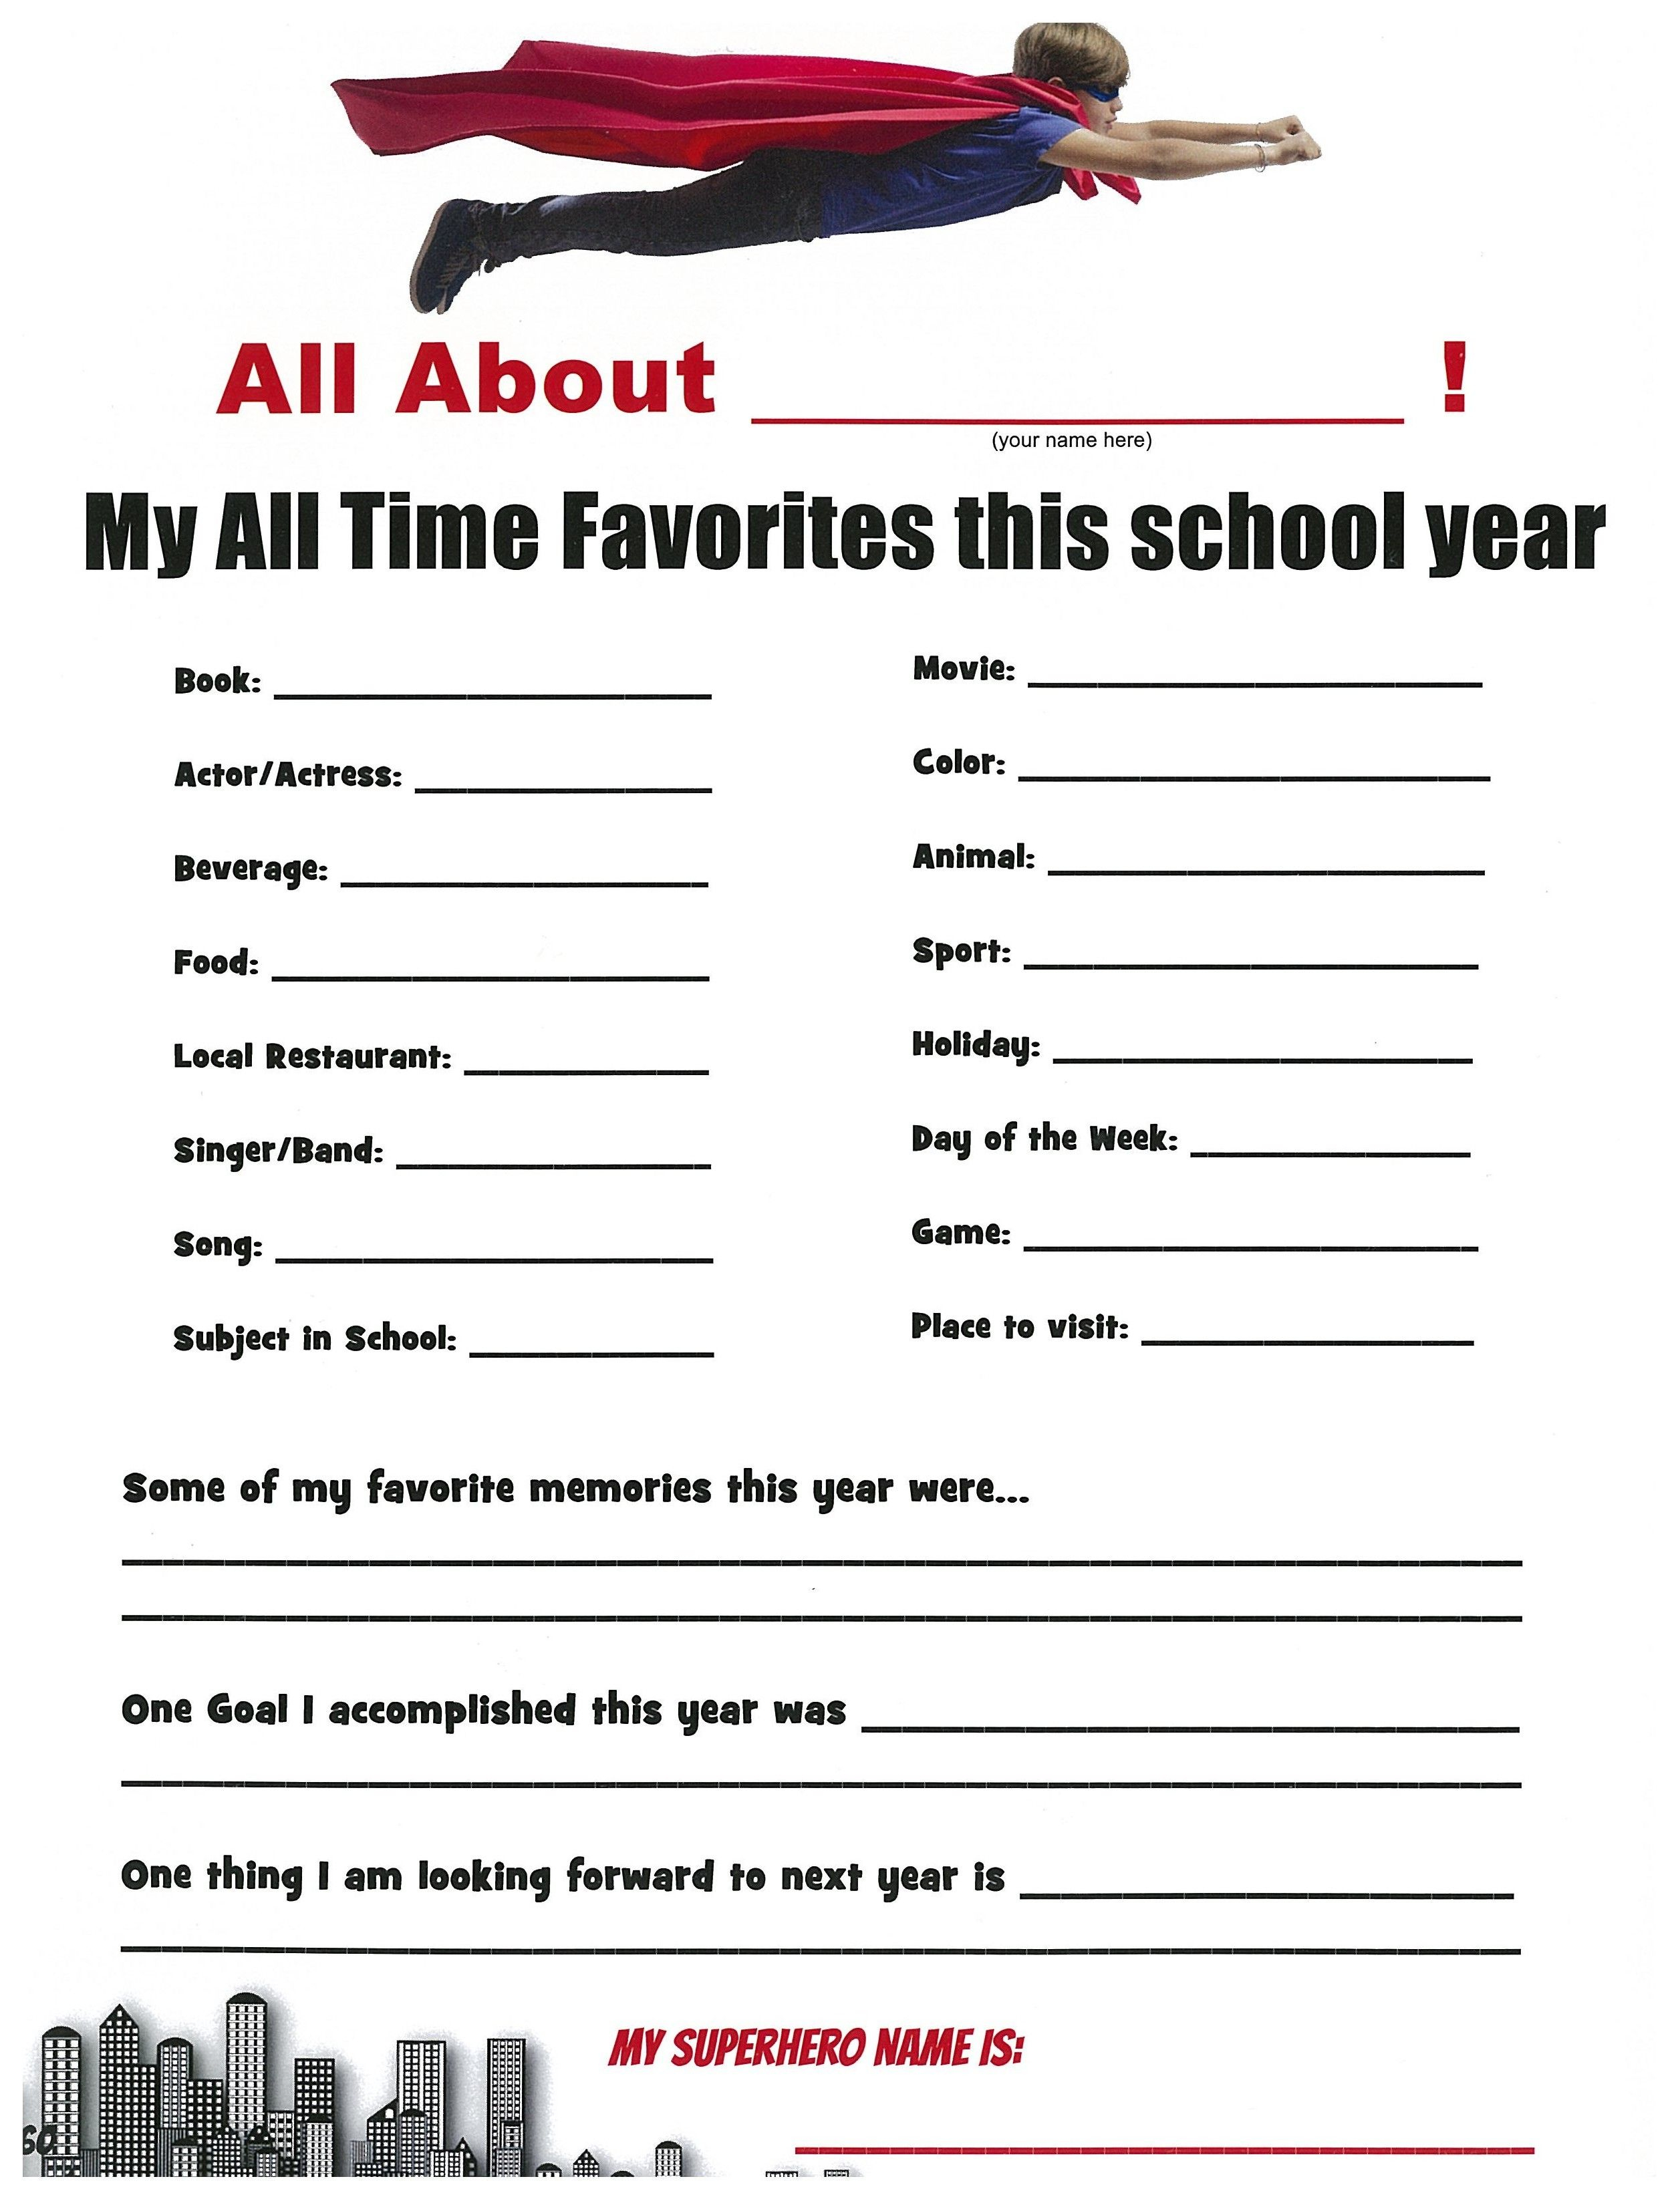 A Cute Idea For A Superhero Themed School Yearbook Page. The Kids | Yearbook Printable Worksheets